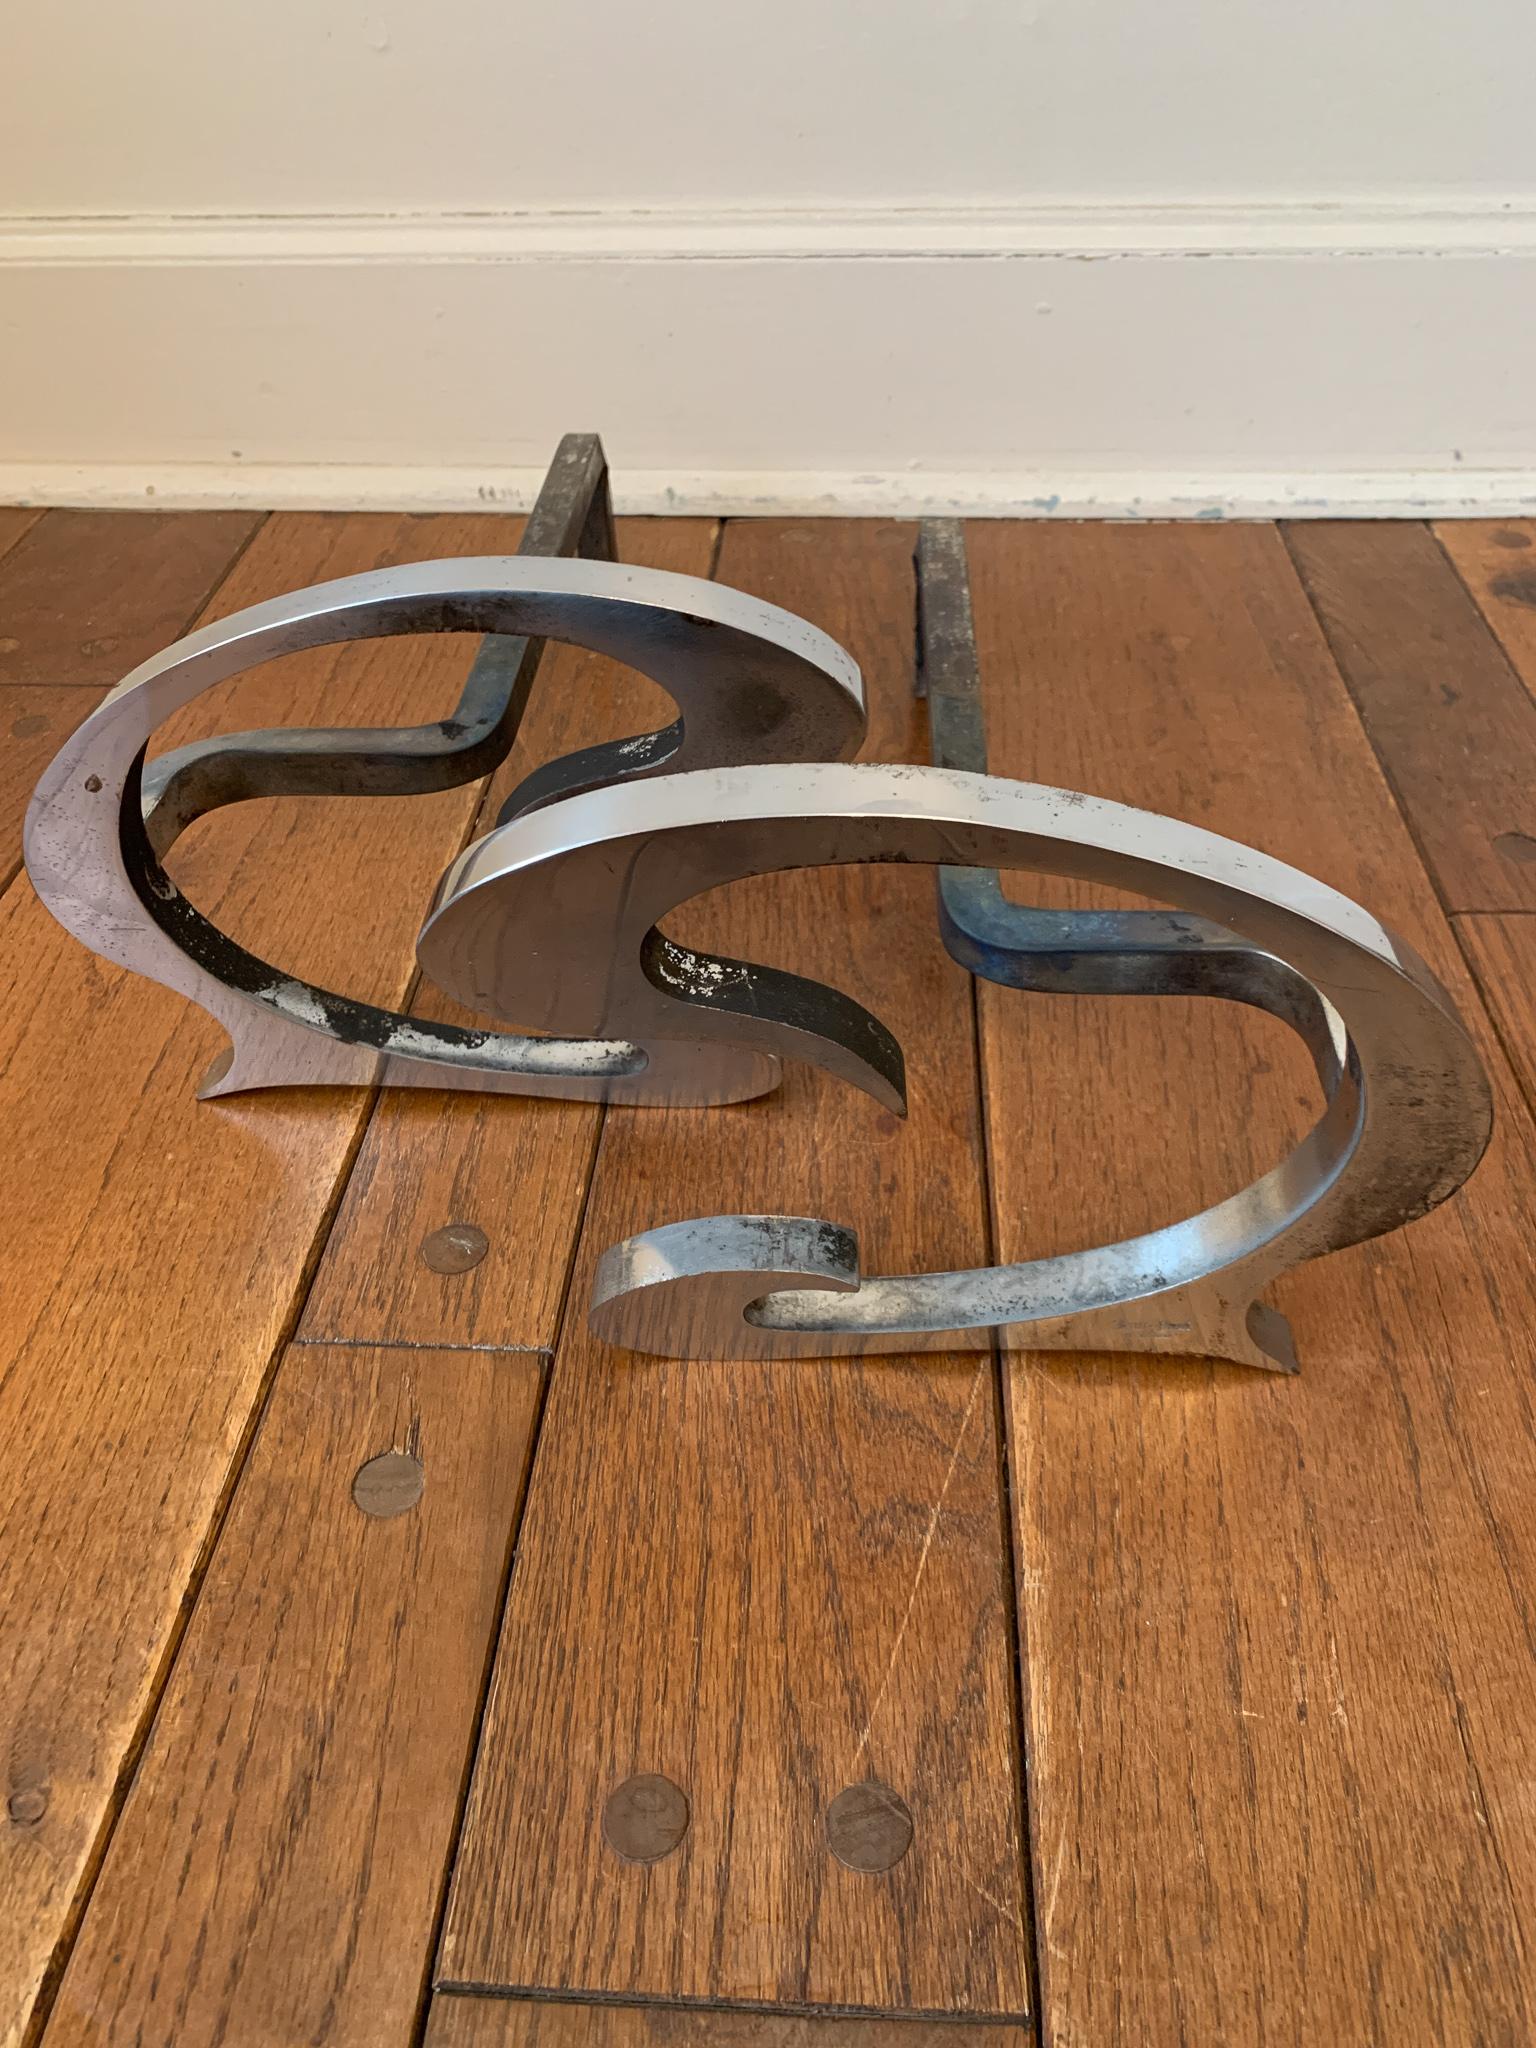 Jean-Paul Créations, Rarely Complete Modernist Fireplace Set, France 1970's In Fair Condition For Sale In Philadelphia, PA